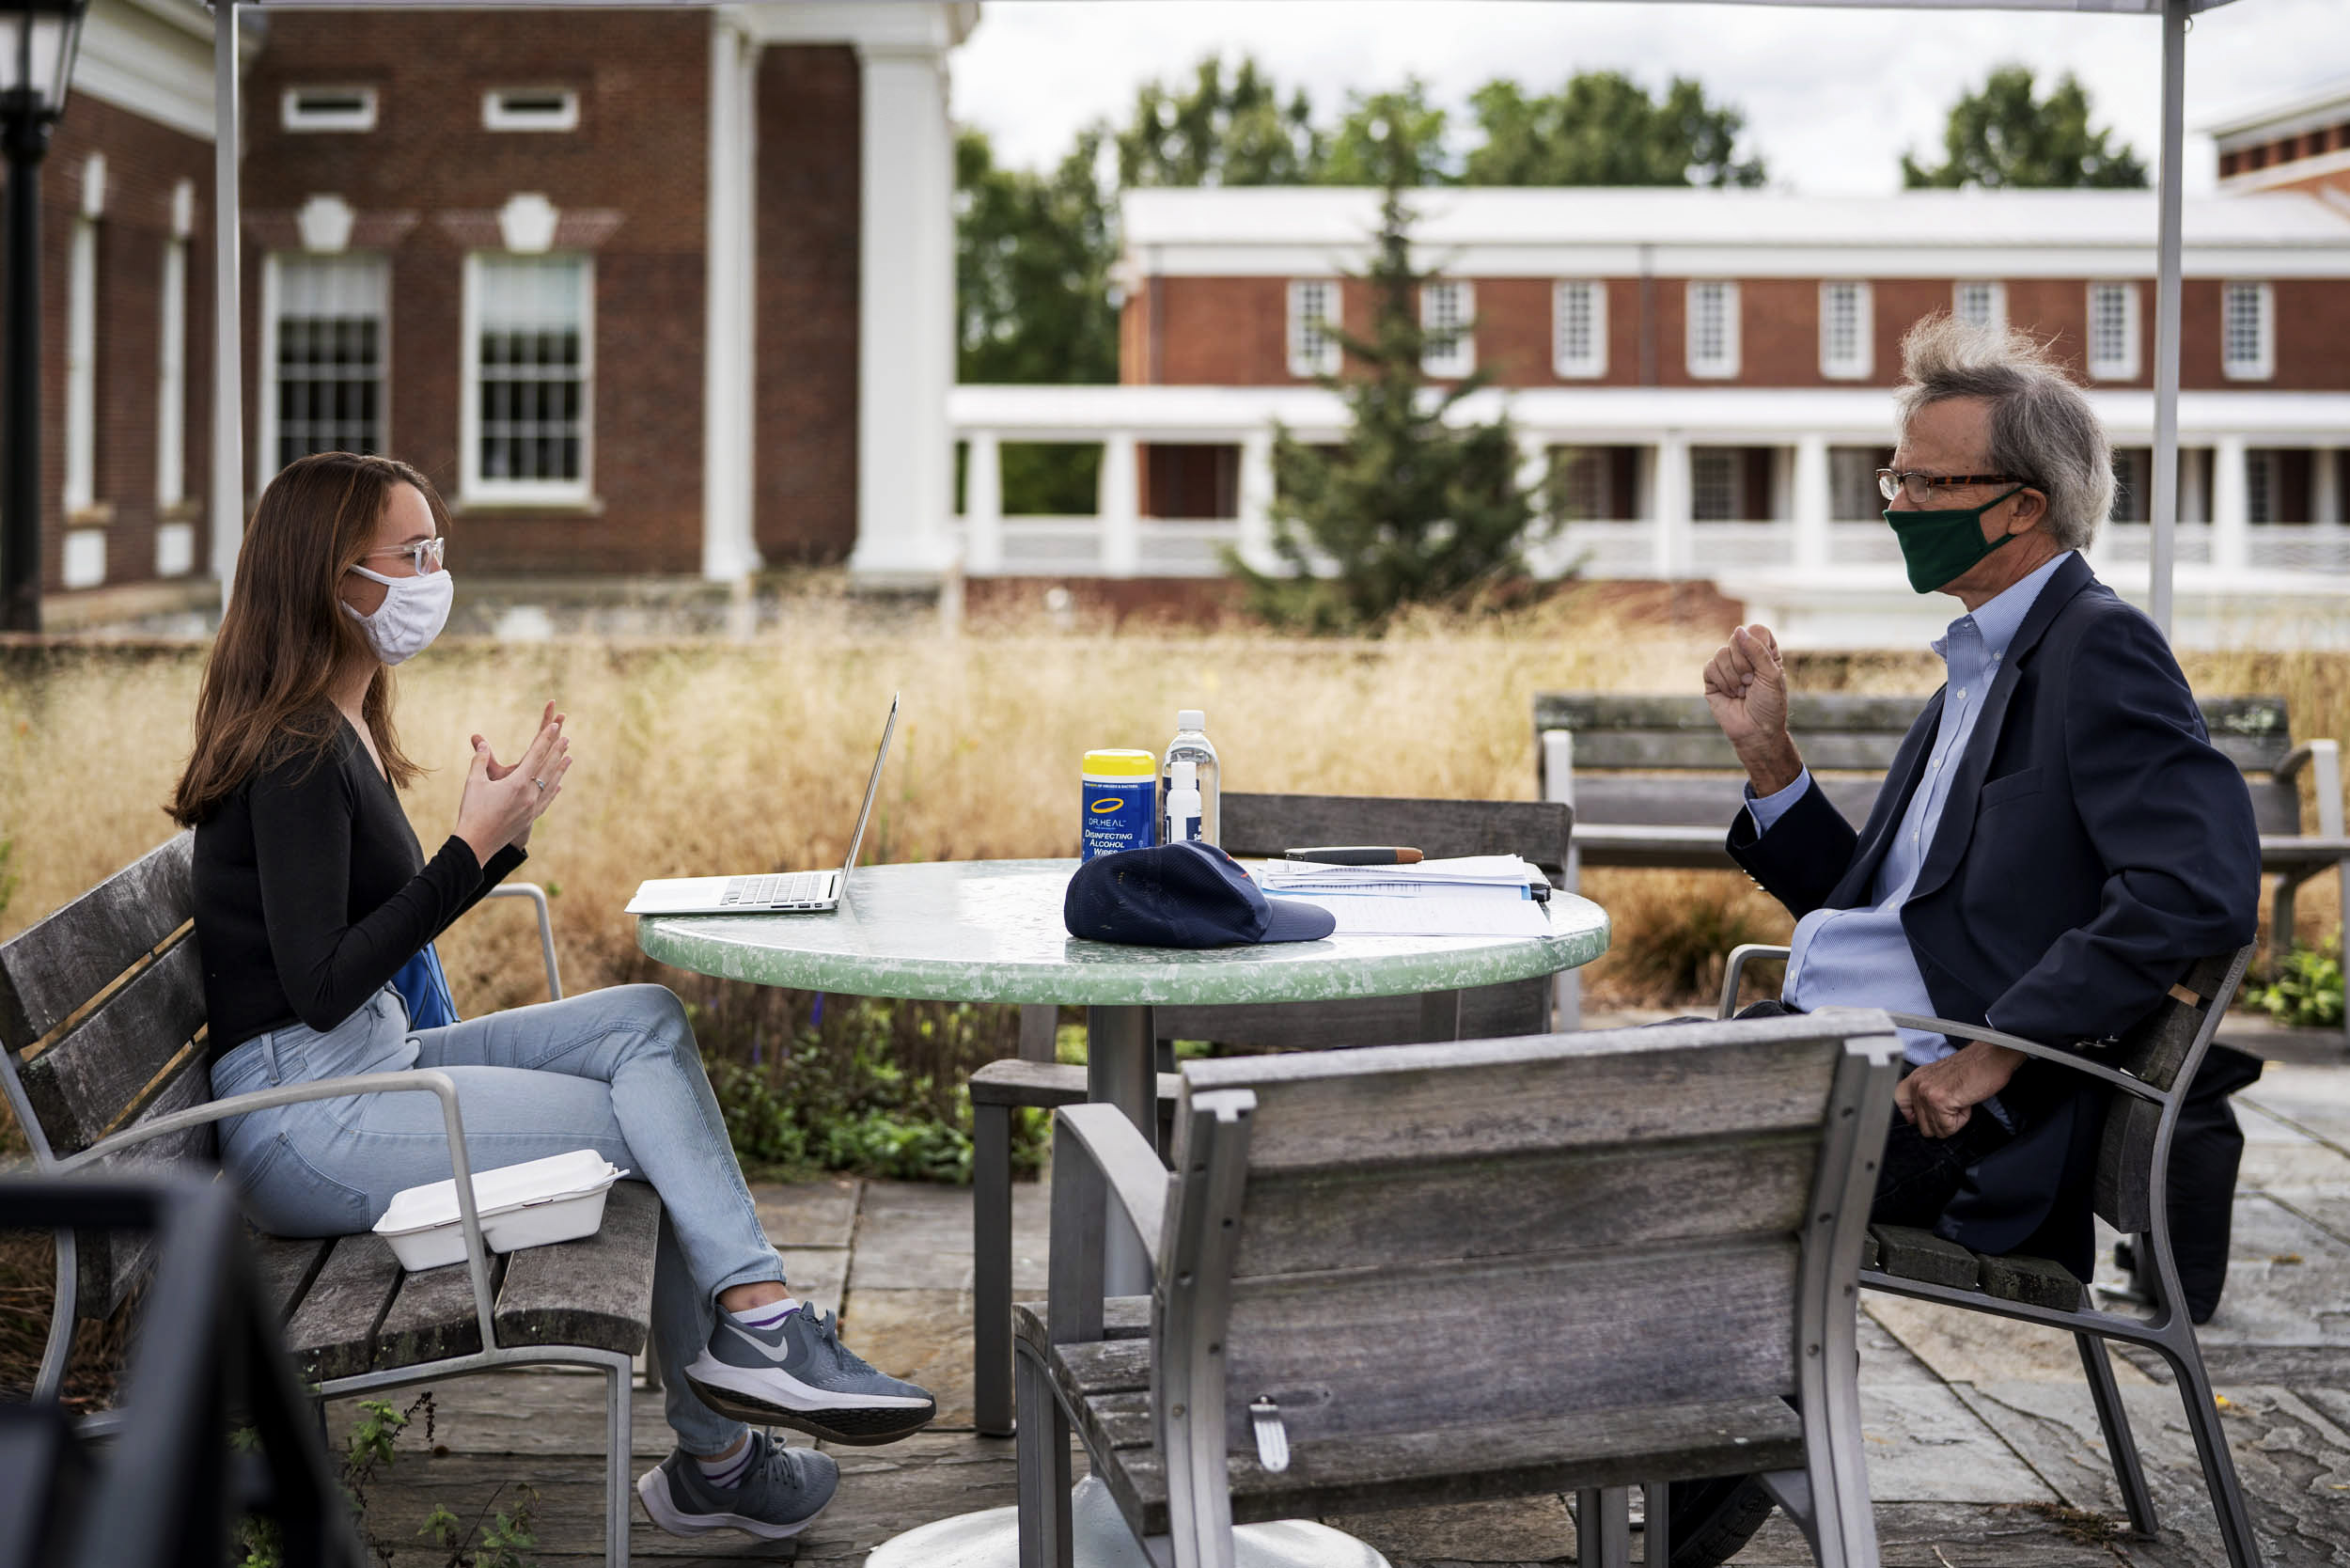 Professors have had to get creative with their office hours. Professor of practice Gerald Warburg of the Frank Batten School of Leadership and Public Policy meets with students under a tent atop the Batten Schoolâs green roof.